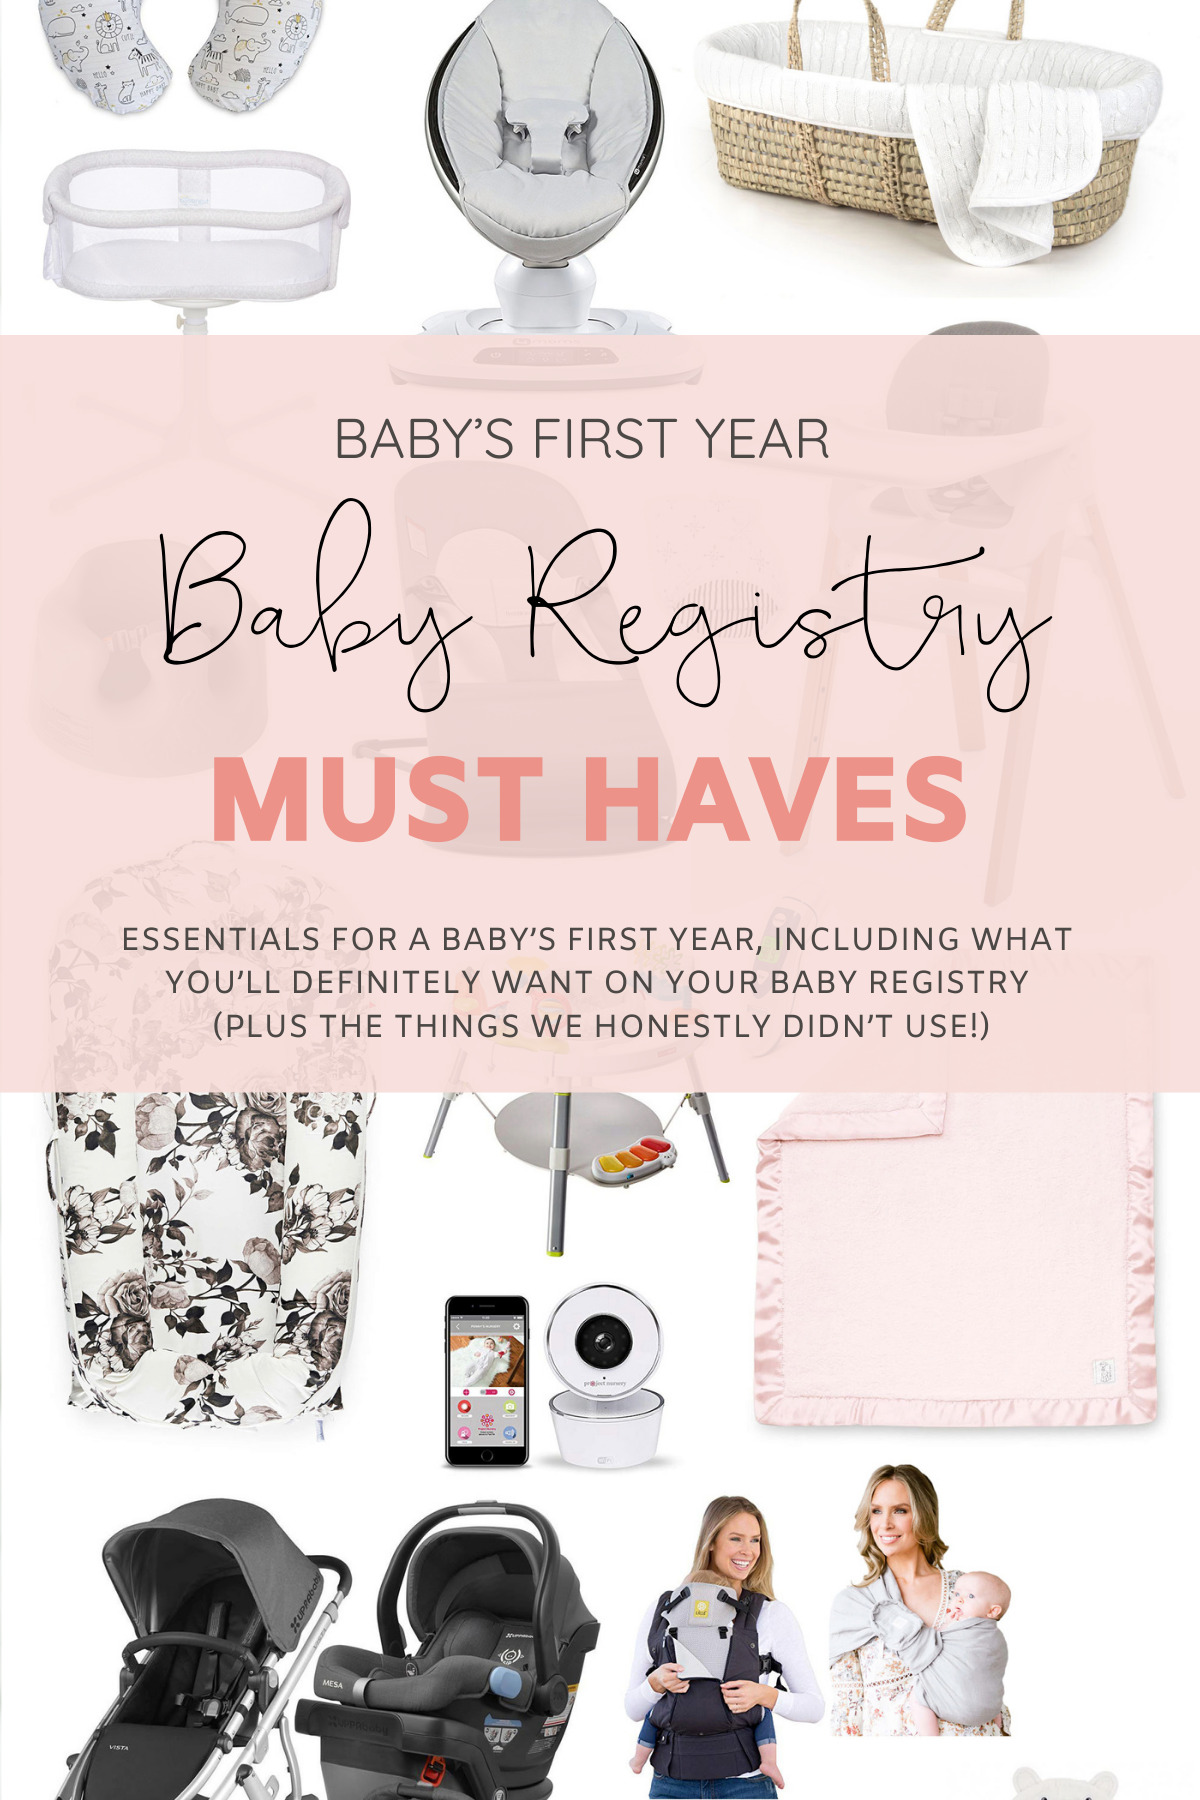 Mom blogger Lexi of Glitter, Inc. shares what baby items were must-haves and essentials for baby's first year, including exactly what to put on a baby registry and why; plus what not to register for. This baby registry checklist is HUGE. Click through for the details. | glitterinc.com | @glitterinc